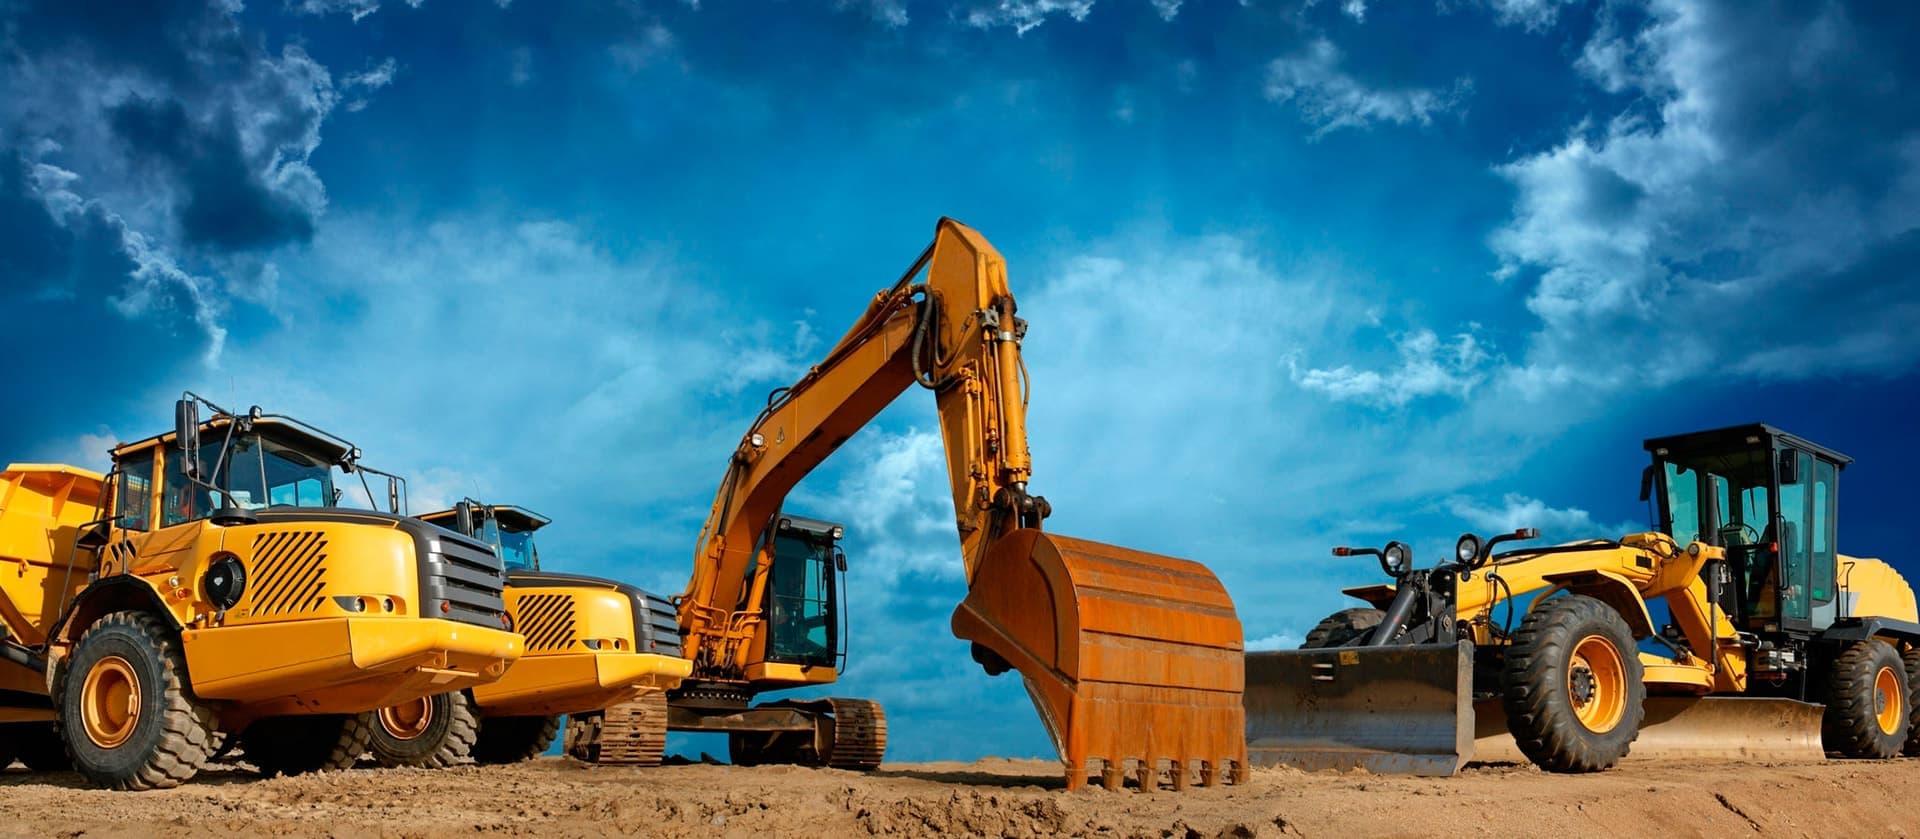 canberra construction equipment hire